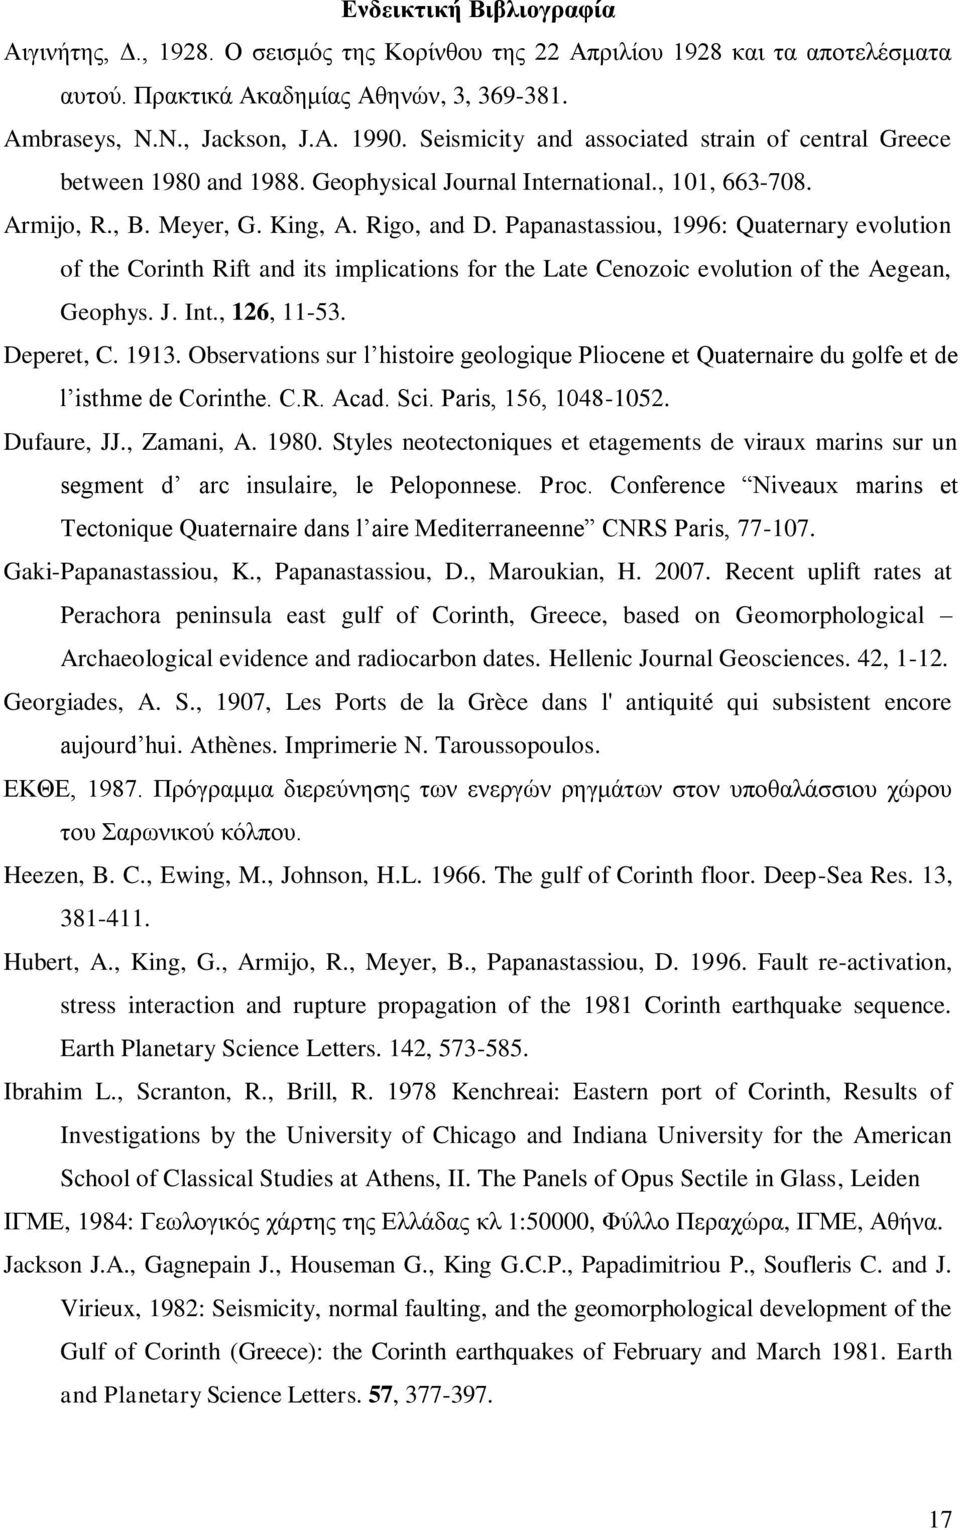 Papanastassiou, 1996: Quaternary evolution of the Corinth Rift and its implications for the Late Cenozoic evolution of the Aegean, Geophys. J. Int., 126, 11-53. Deperet, C. 1913.